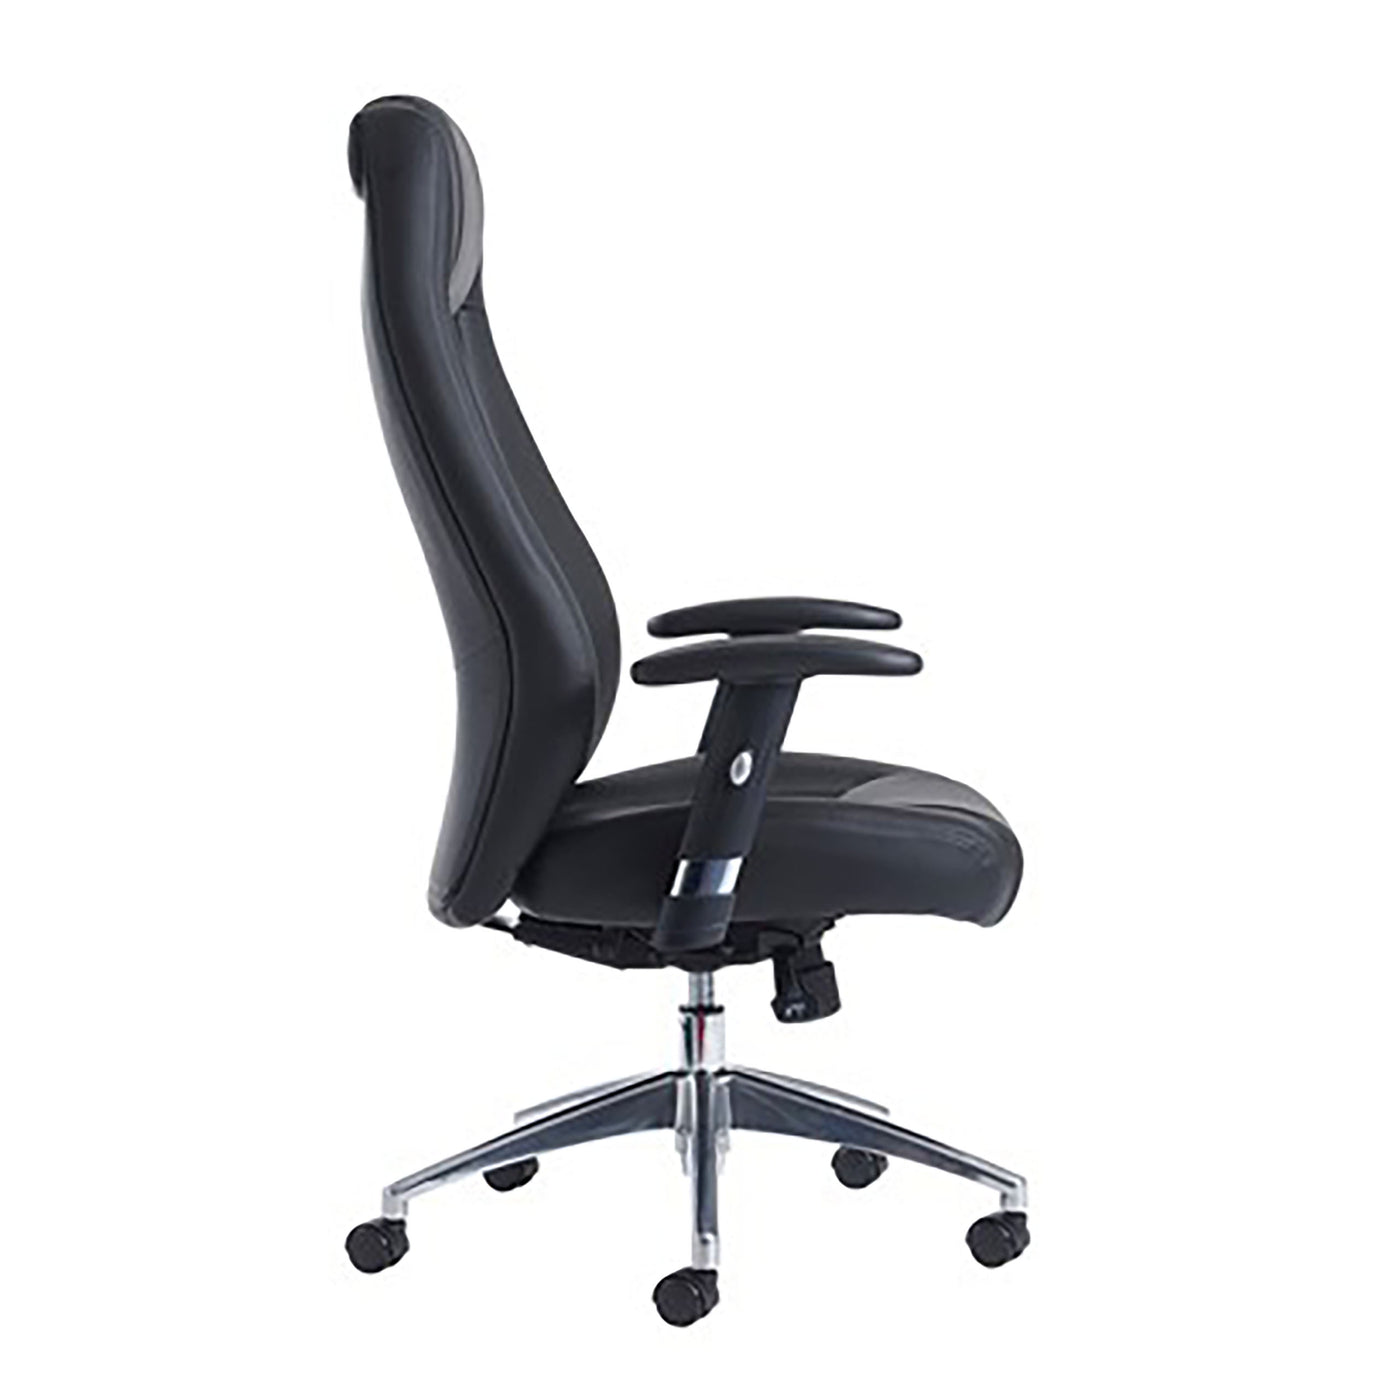 Odessa Faux Leather Home Office Chair | Home Office Furniture | Ergonomic Office Chair